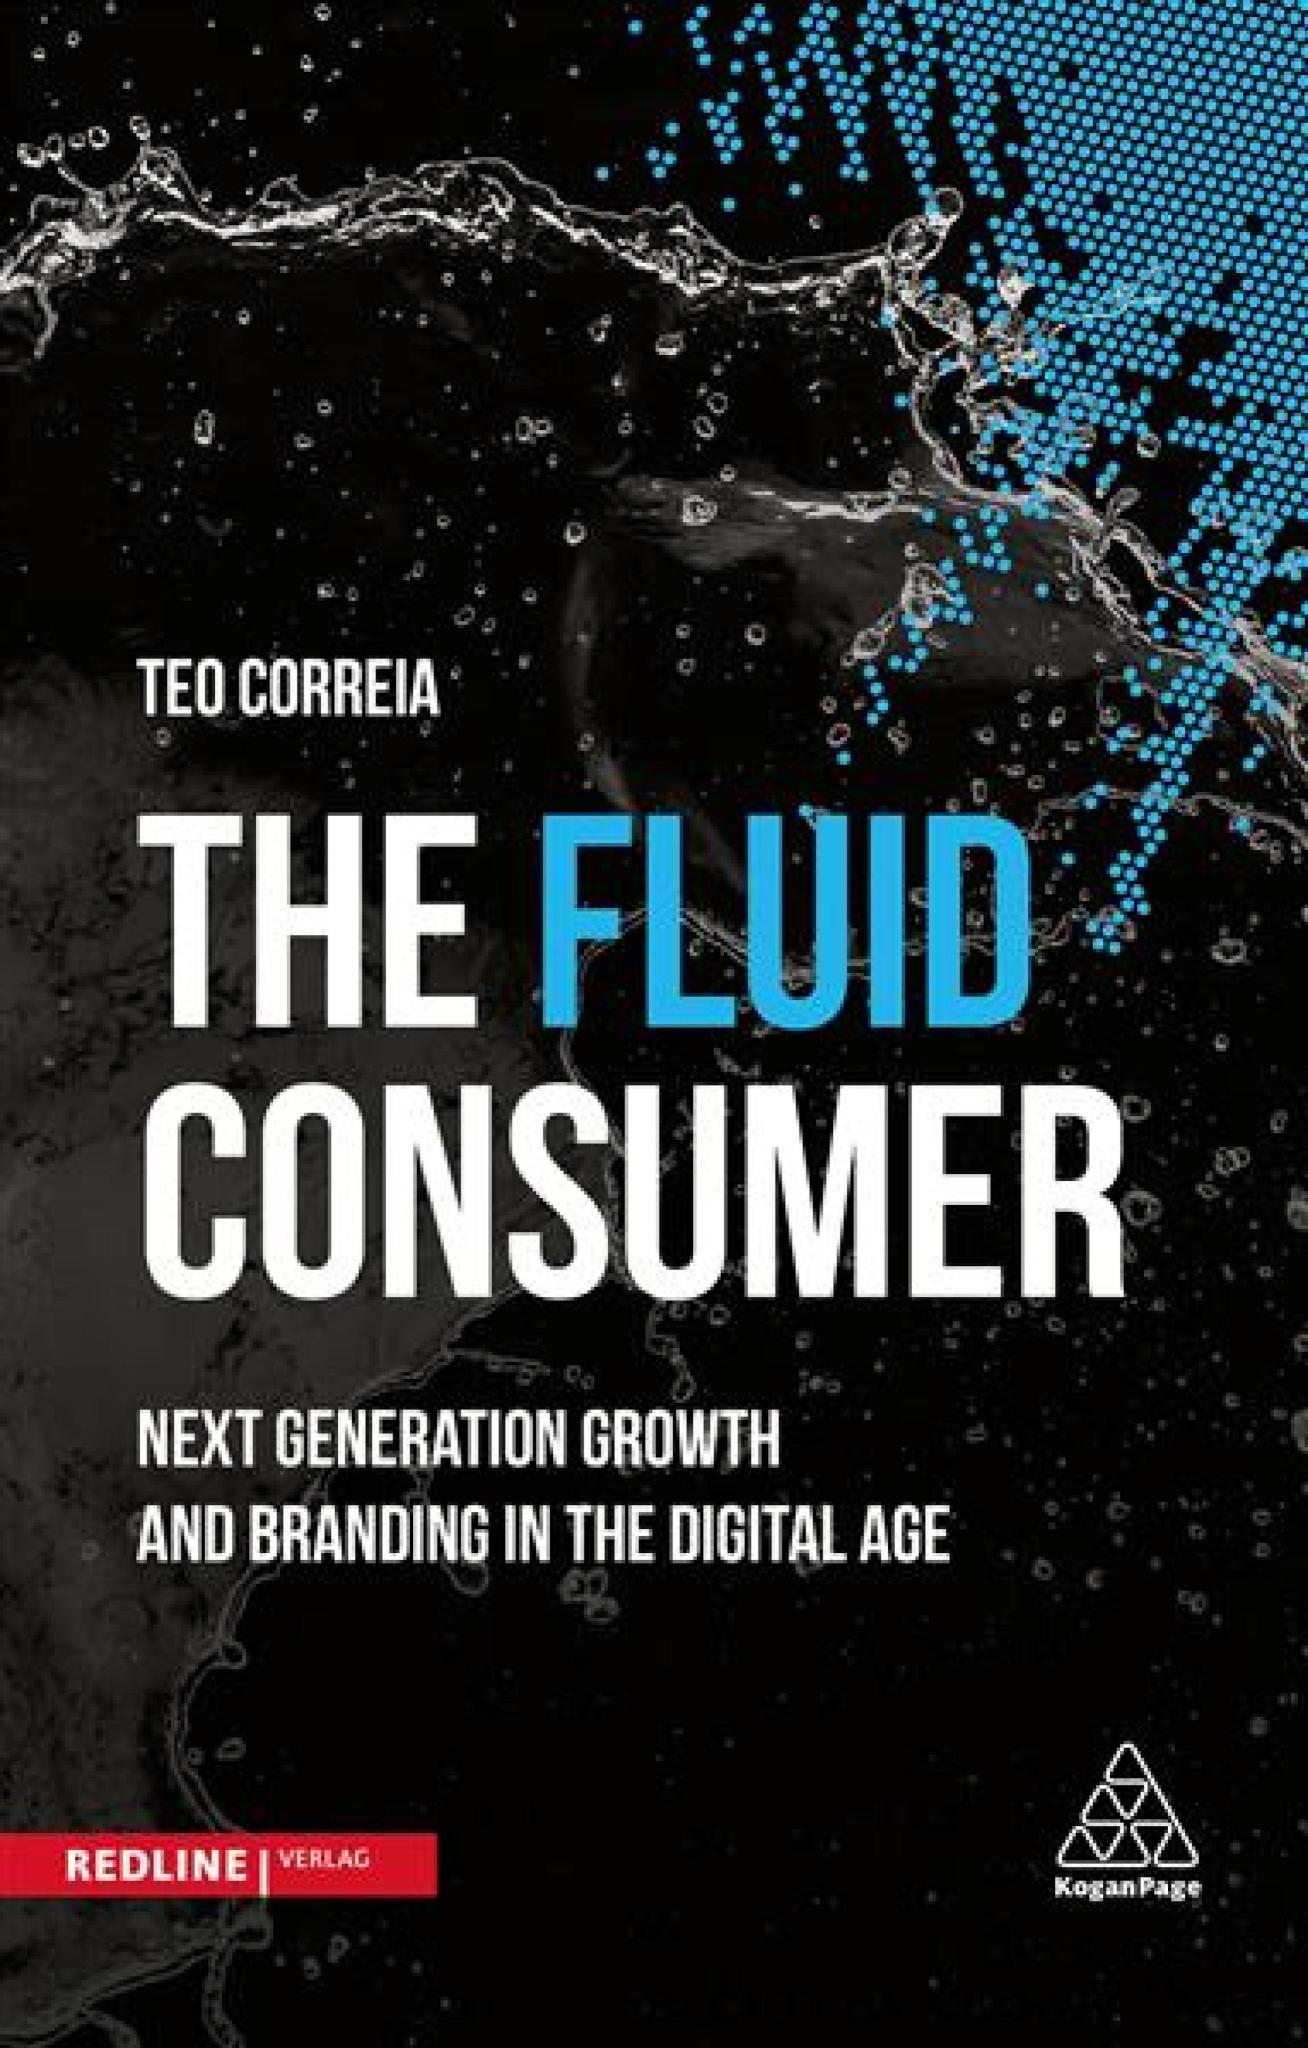 The Fluid Consumer Next Generation Growth and Branding in the Digital Age